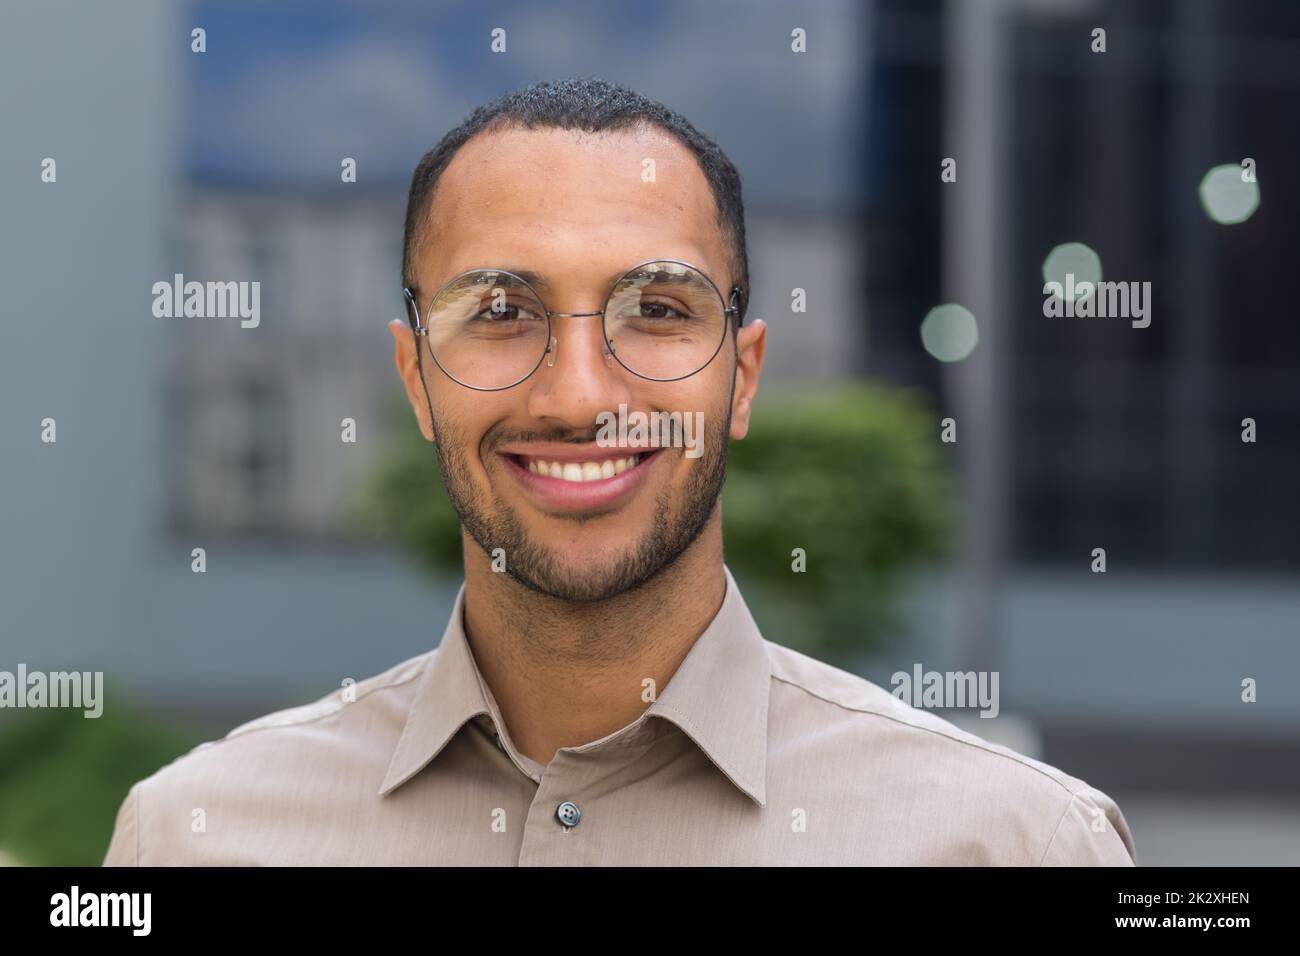 Close-up photo portrait of young entrepreneur wearing glasses, hispanic man smiling and looking at camera, startup entrepreneur outside modern office building. Stock Photo